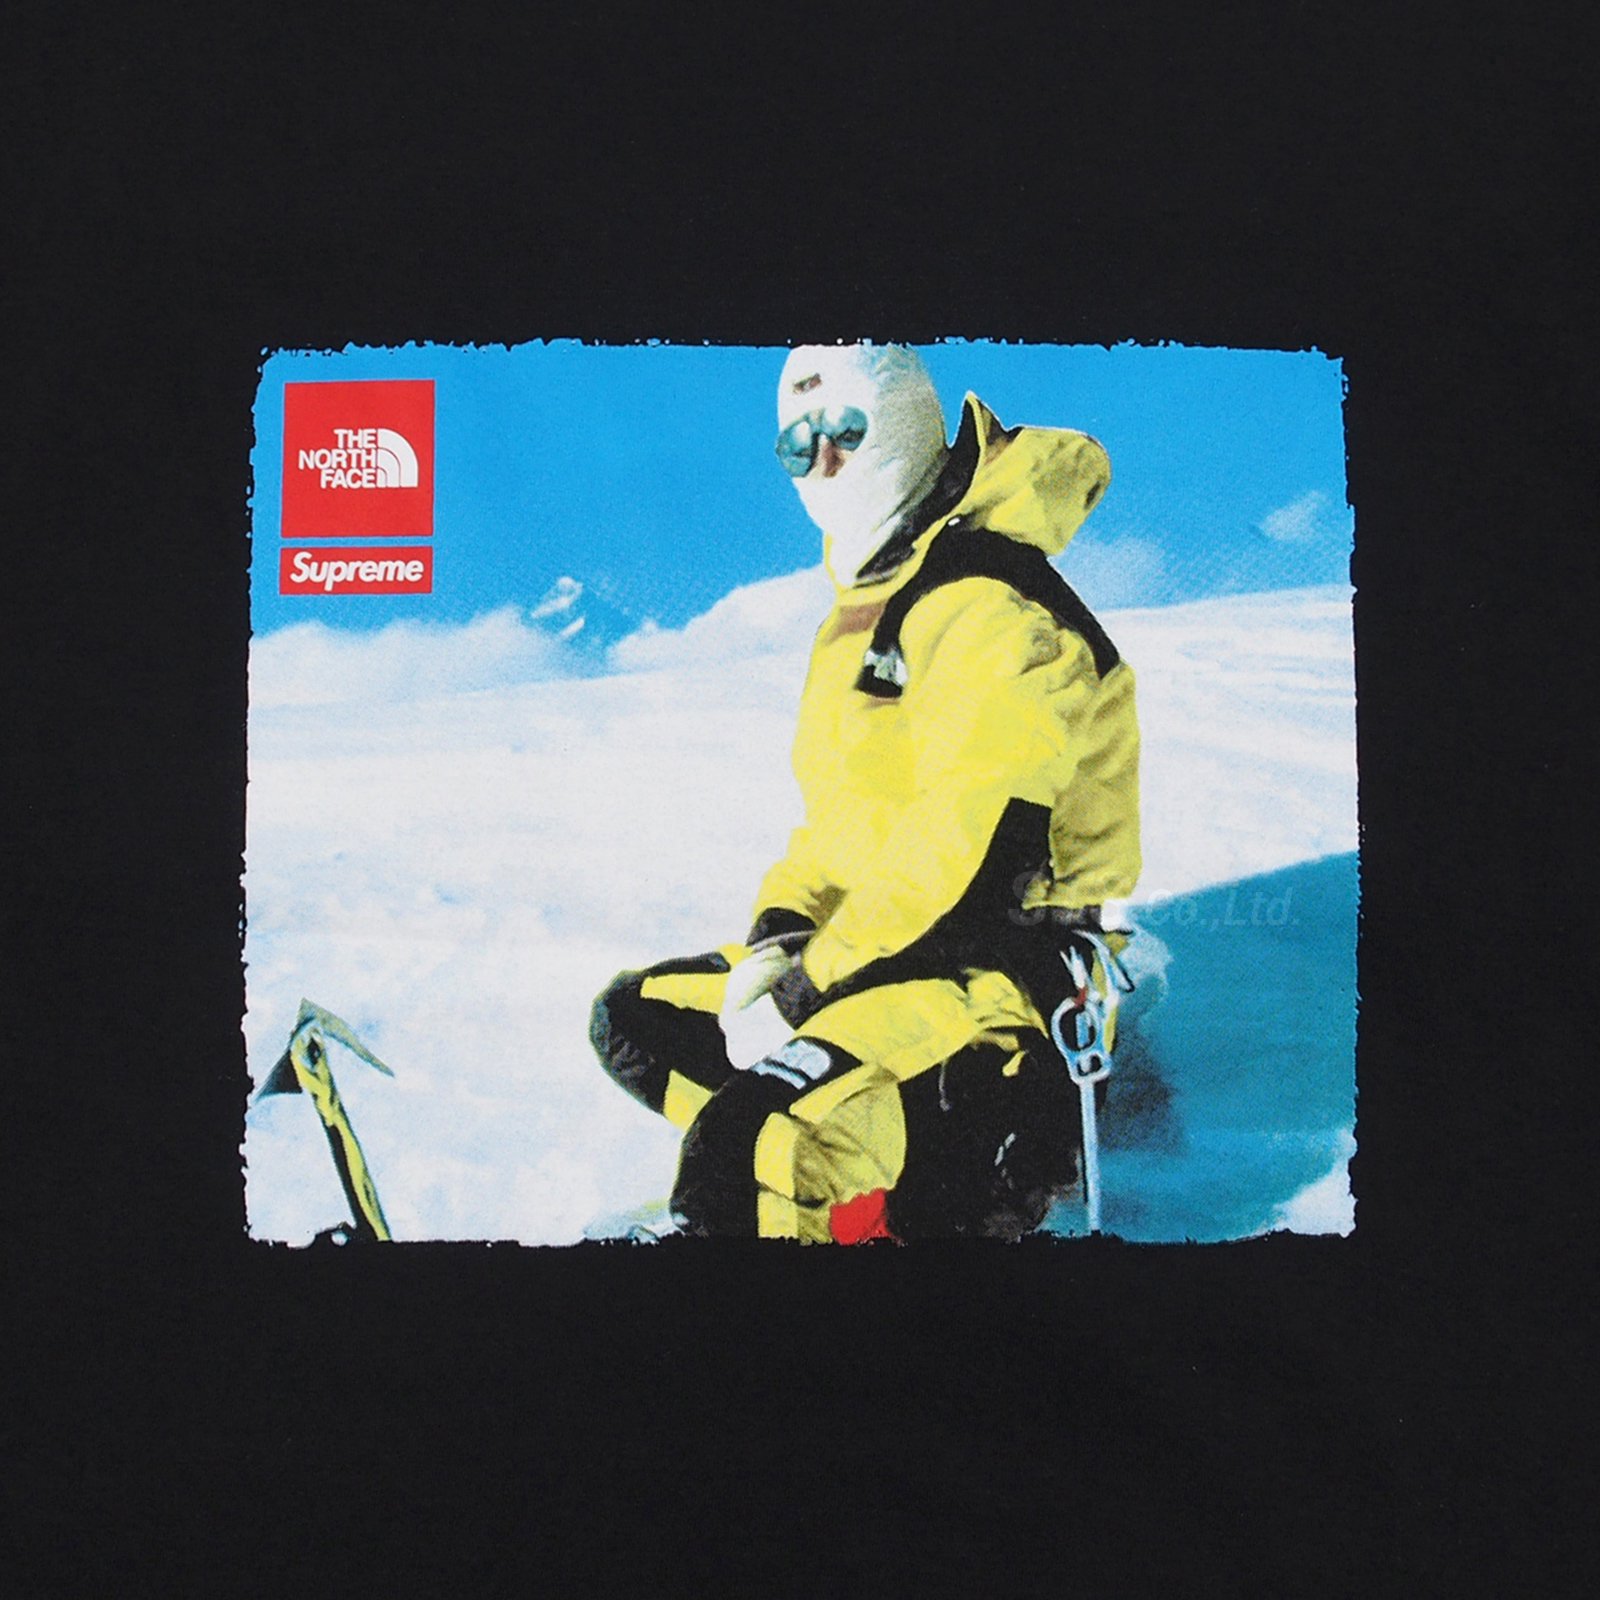 Supreme/The North Face Photo Tee - ParkSIDER